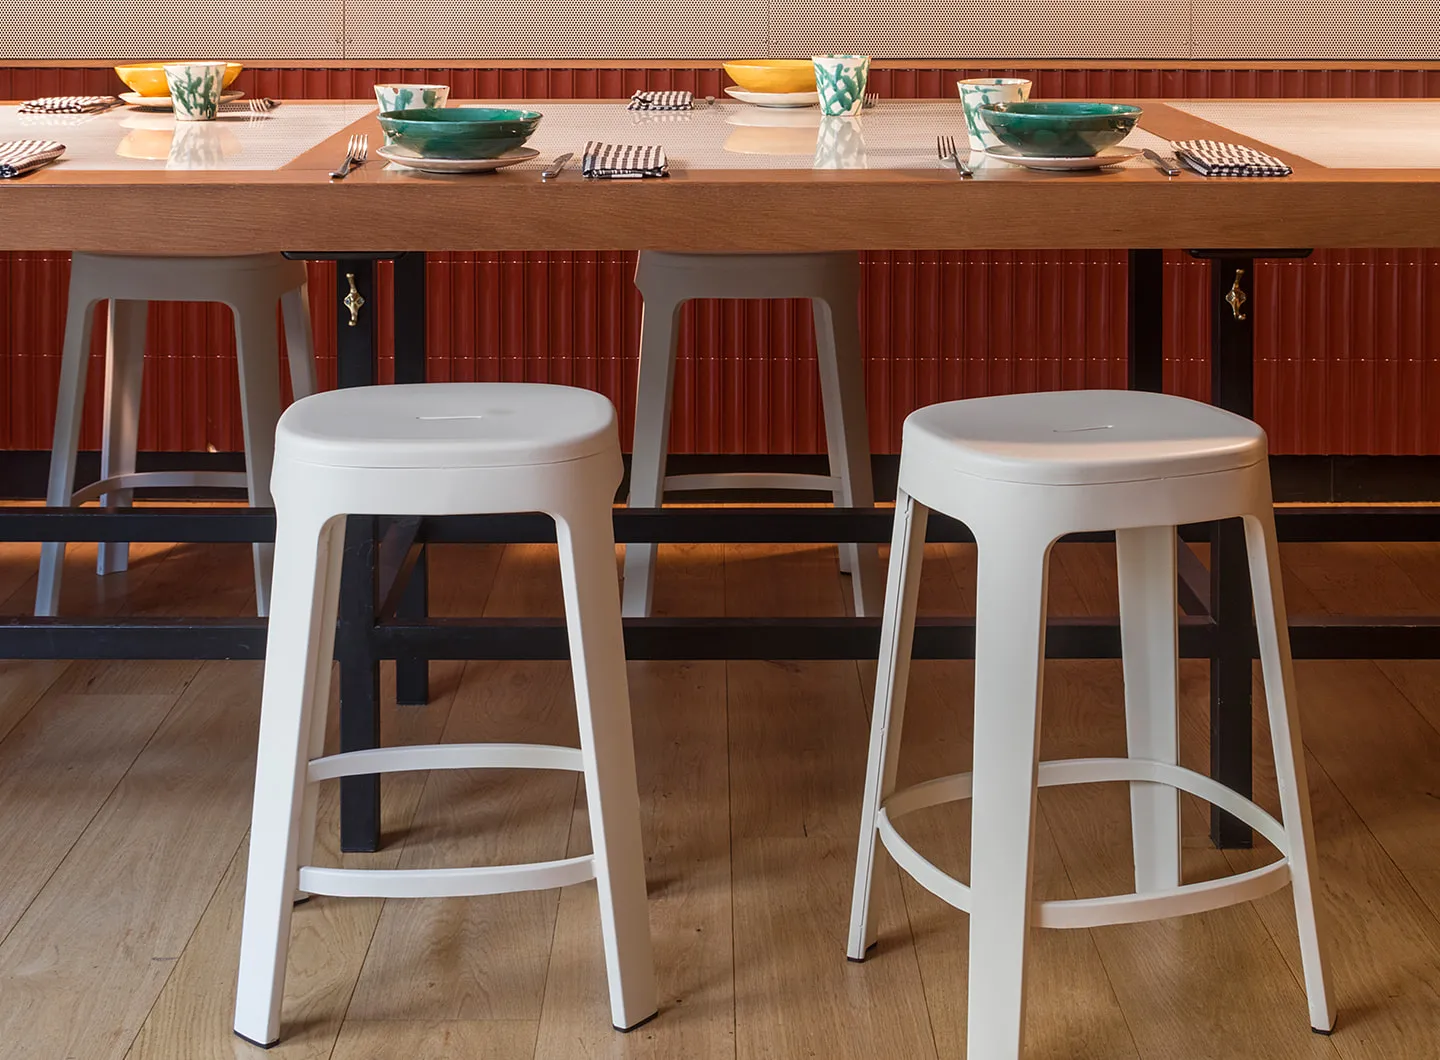 RS Barcelona Ombra stools